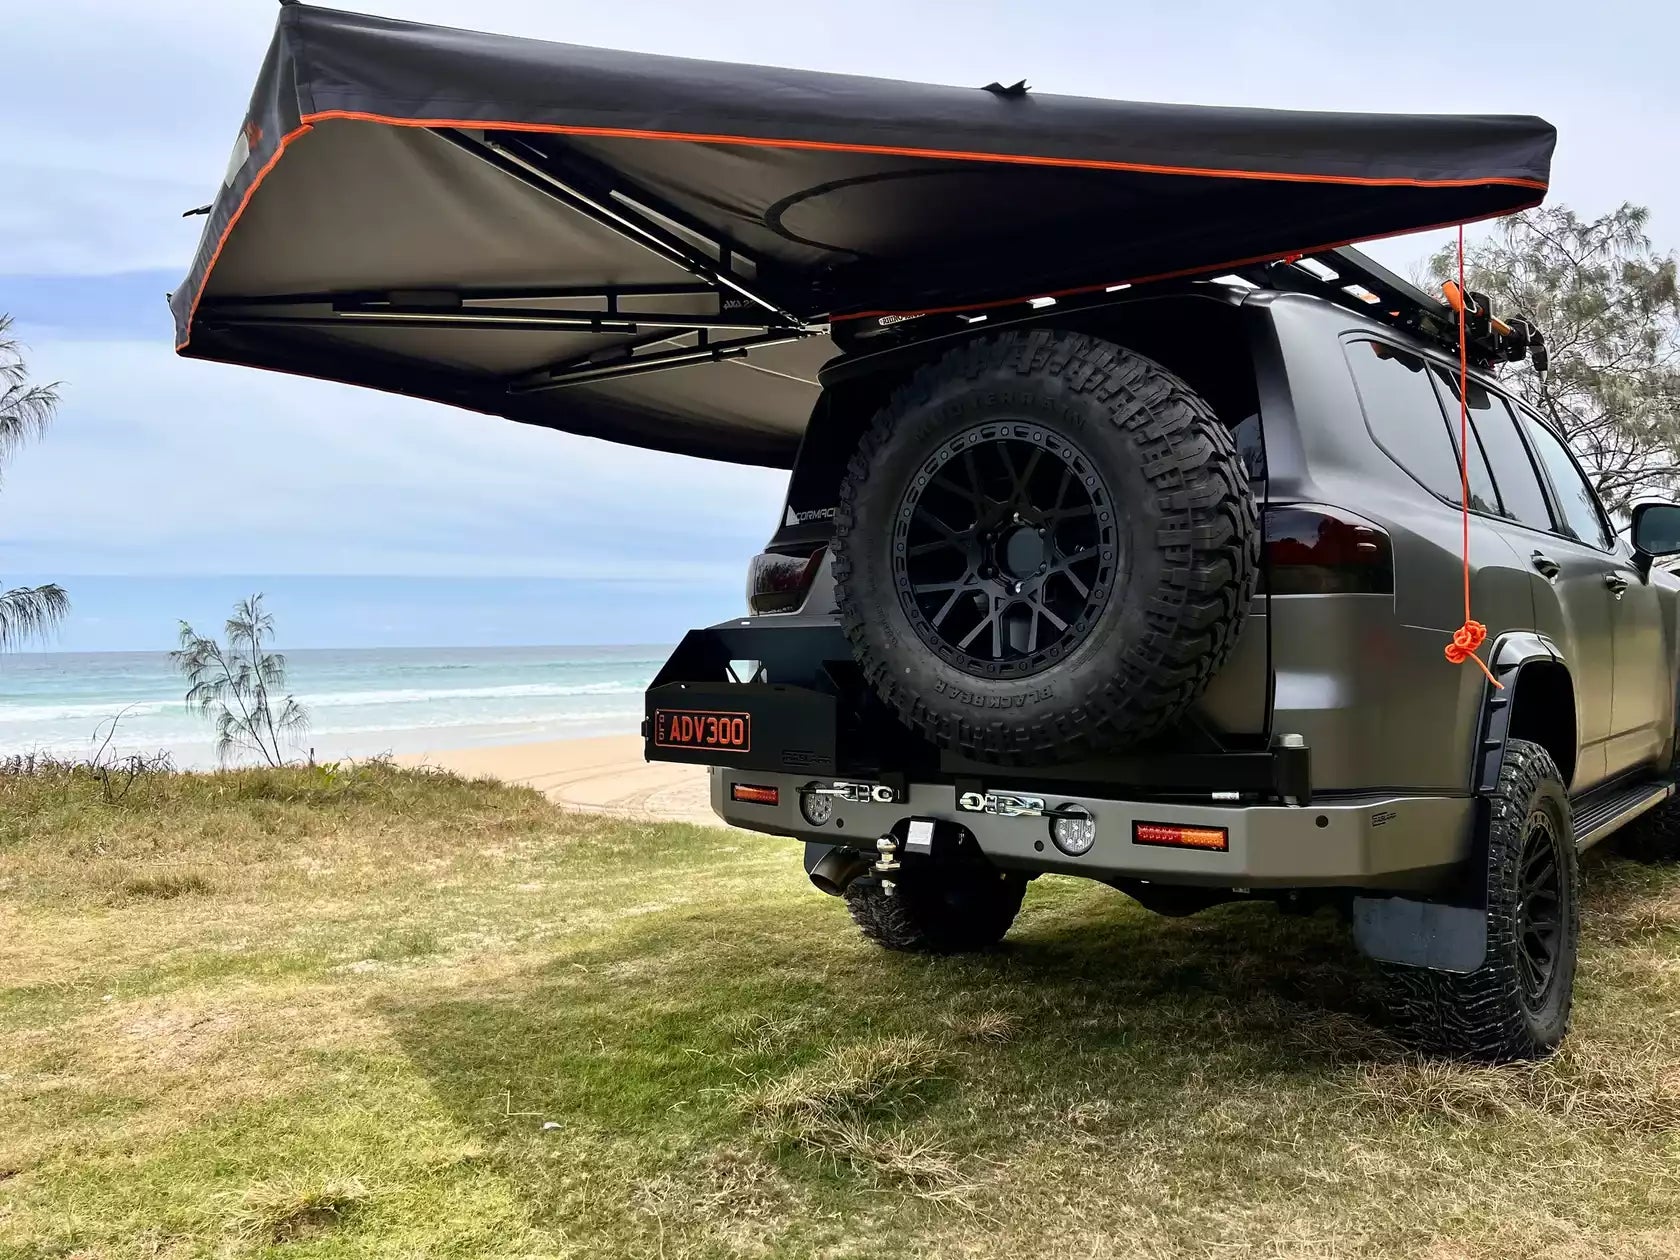 Awning black Campboss side panel unfolded on a 4x4 in front of the sea